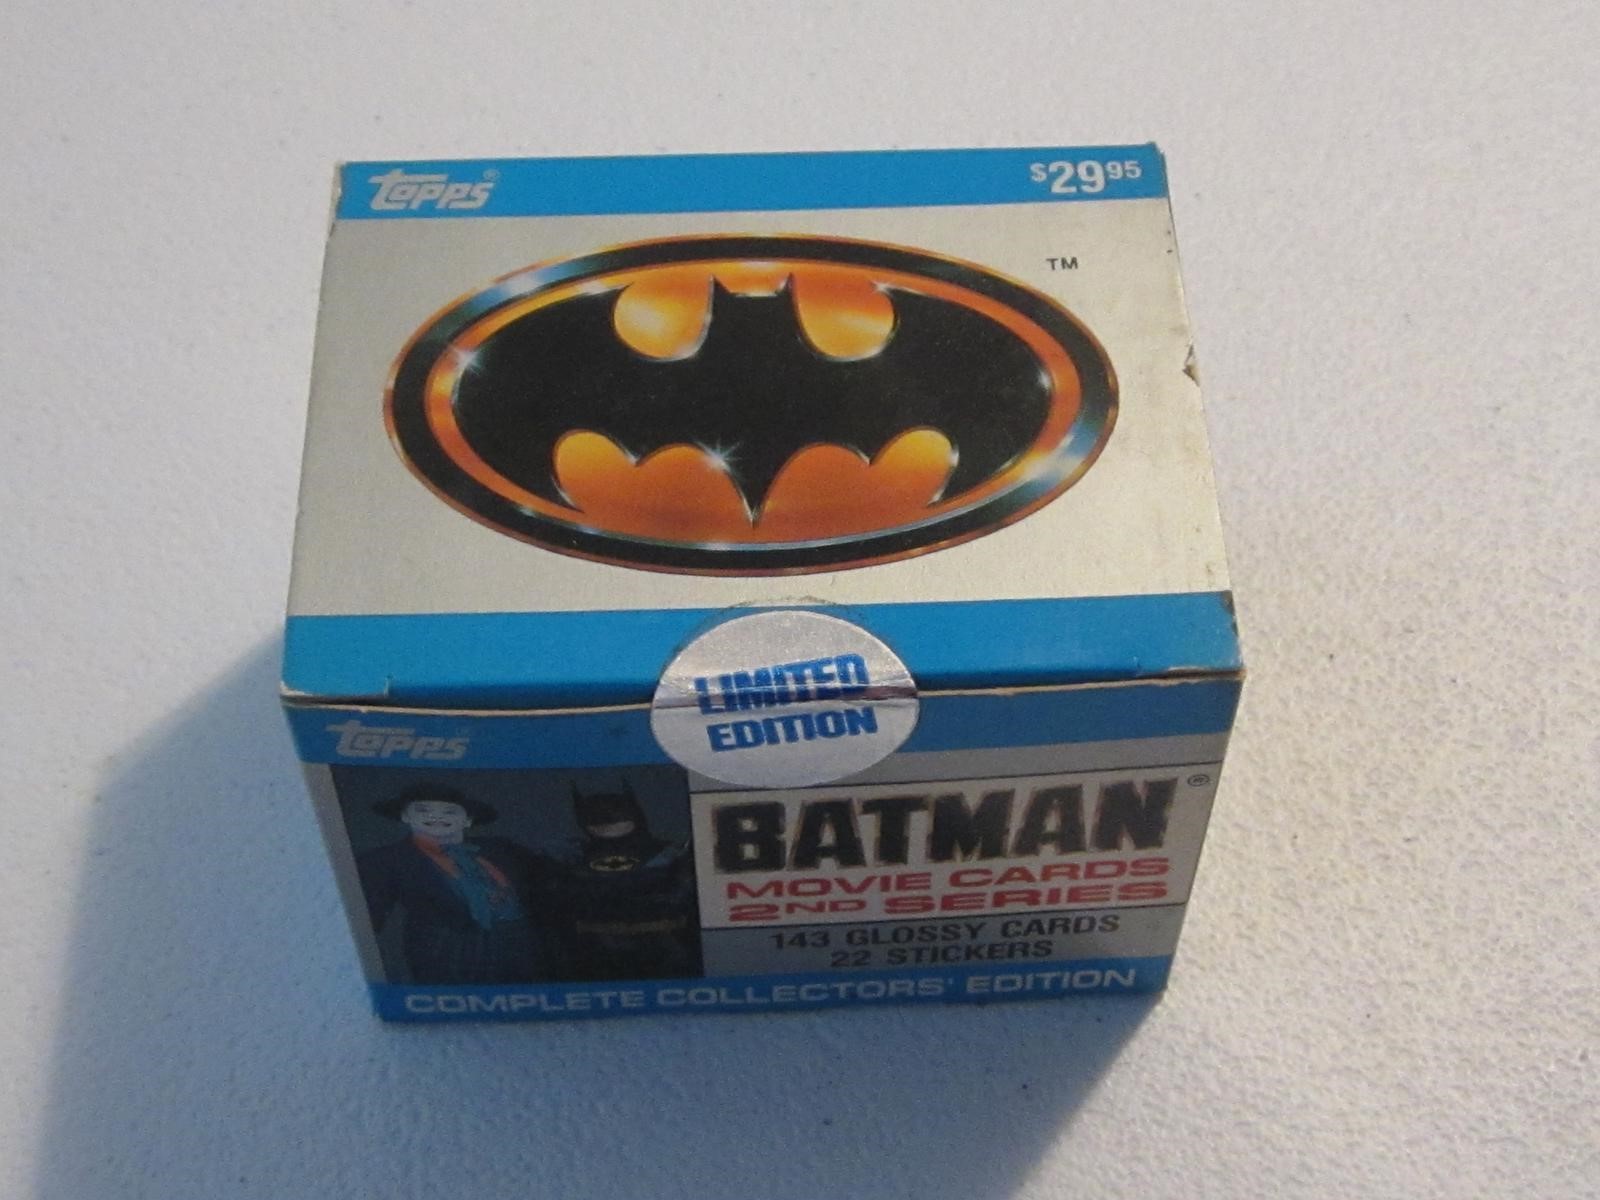 FACTORY SEALED BATMAN MOVIE CARDS AND STICKERS